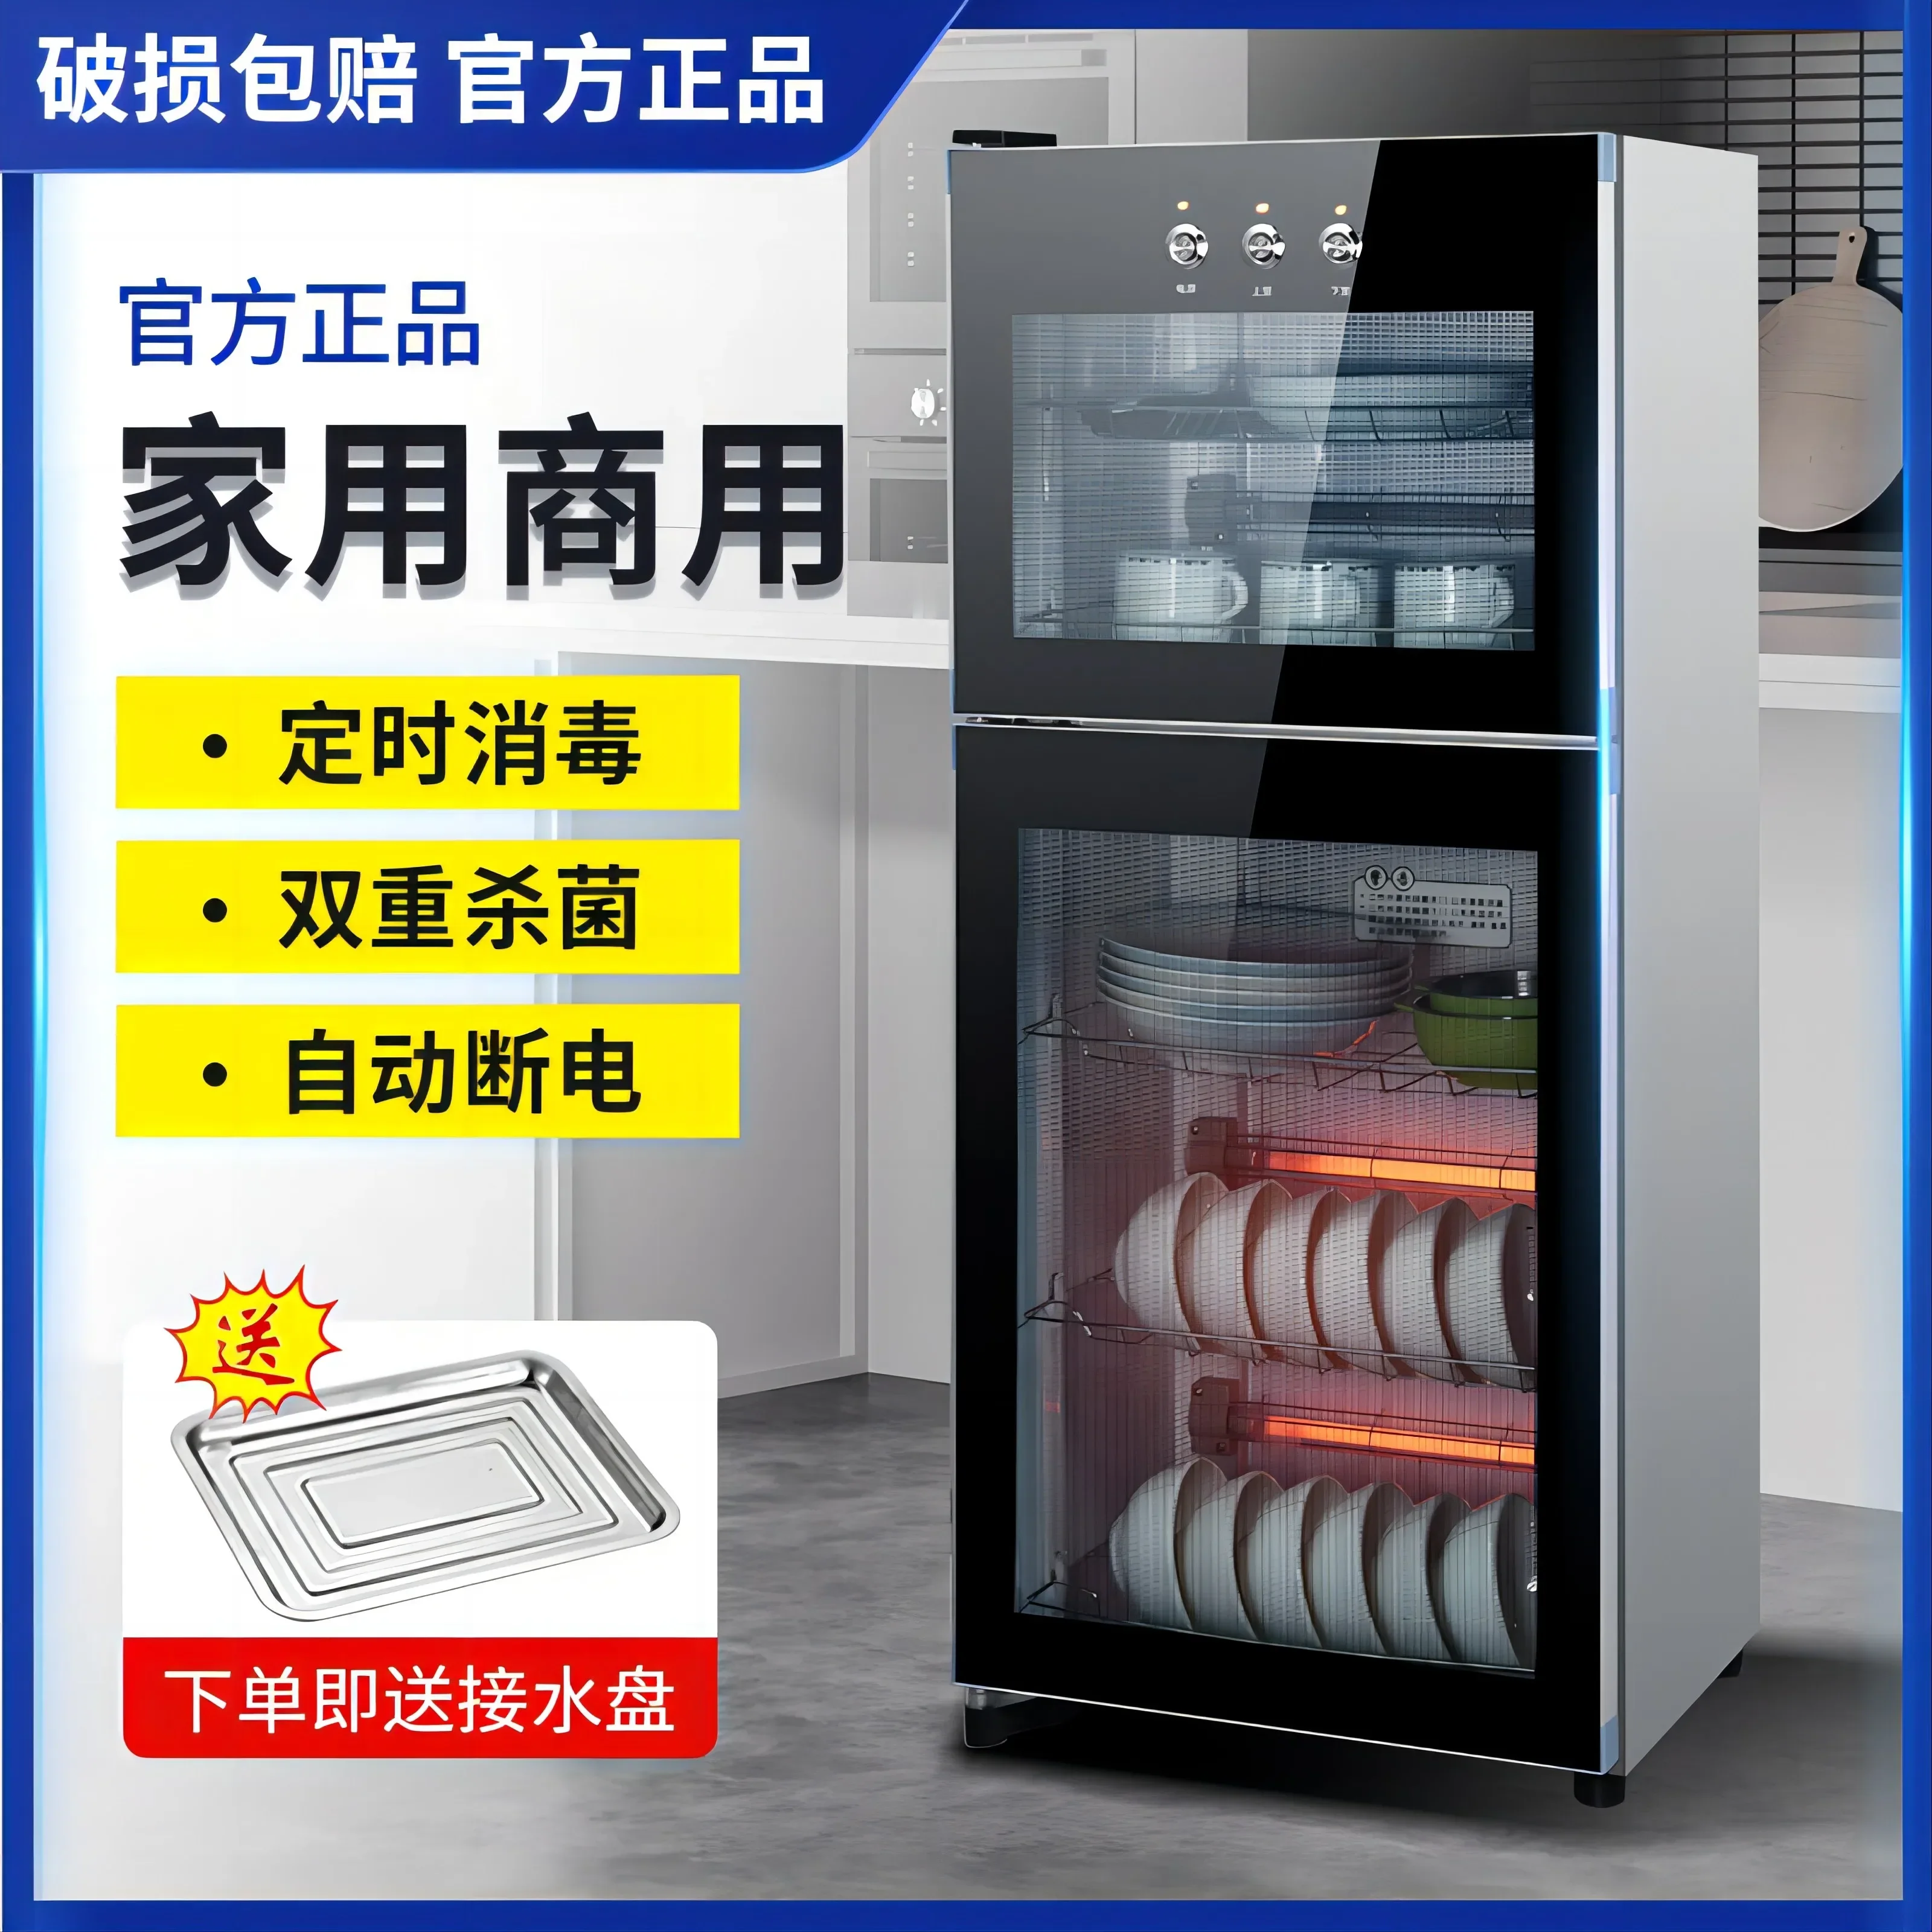 Disinfection cabinet desktop household small two-door stainless steel dining room dining room large-capacity tableware